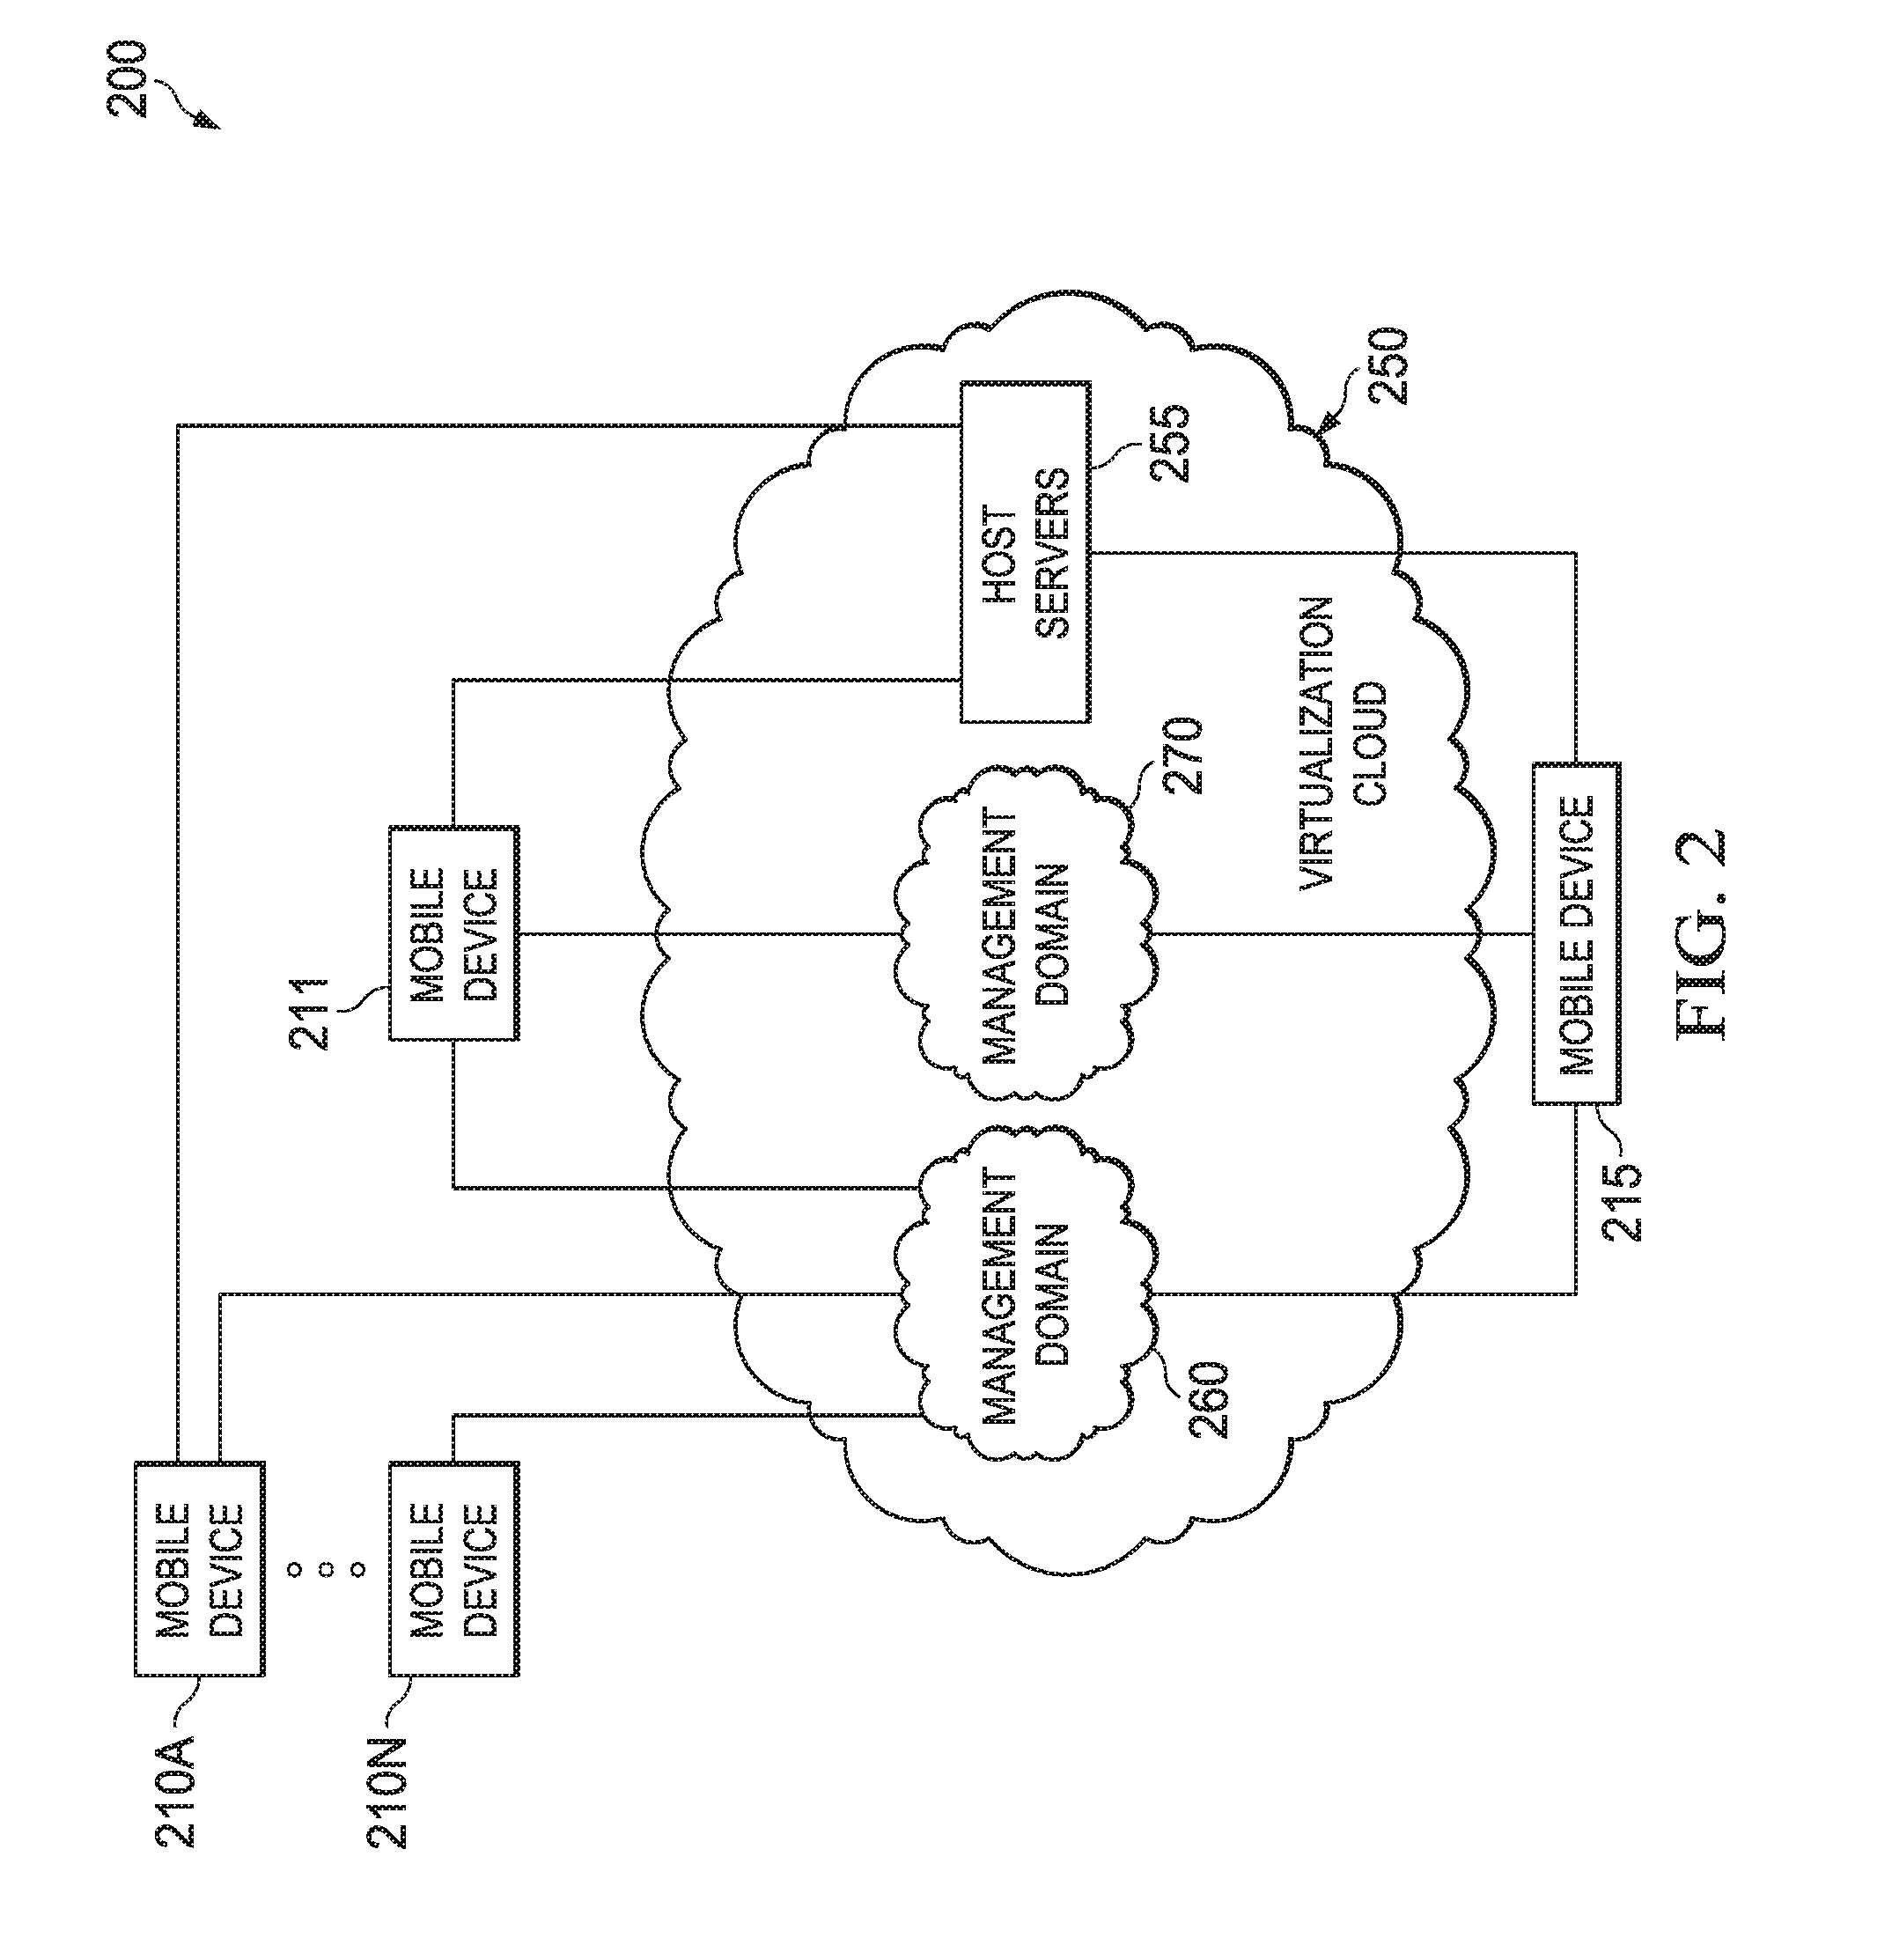 System, method and computer program product for connecting roaming mobile devices to a virtual device platform